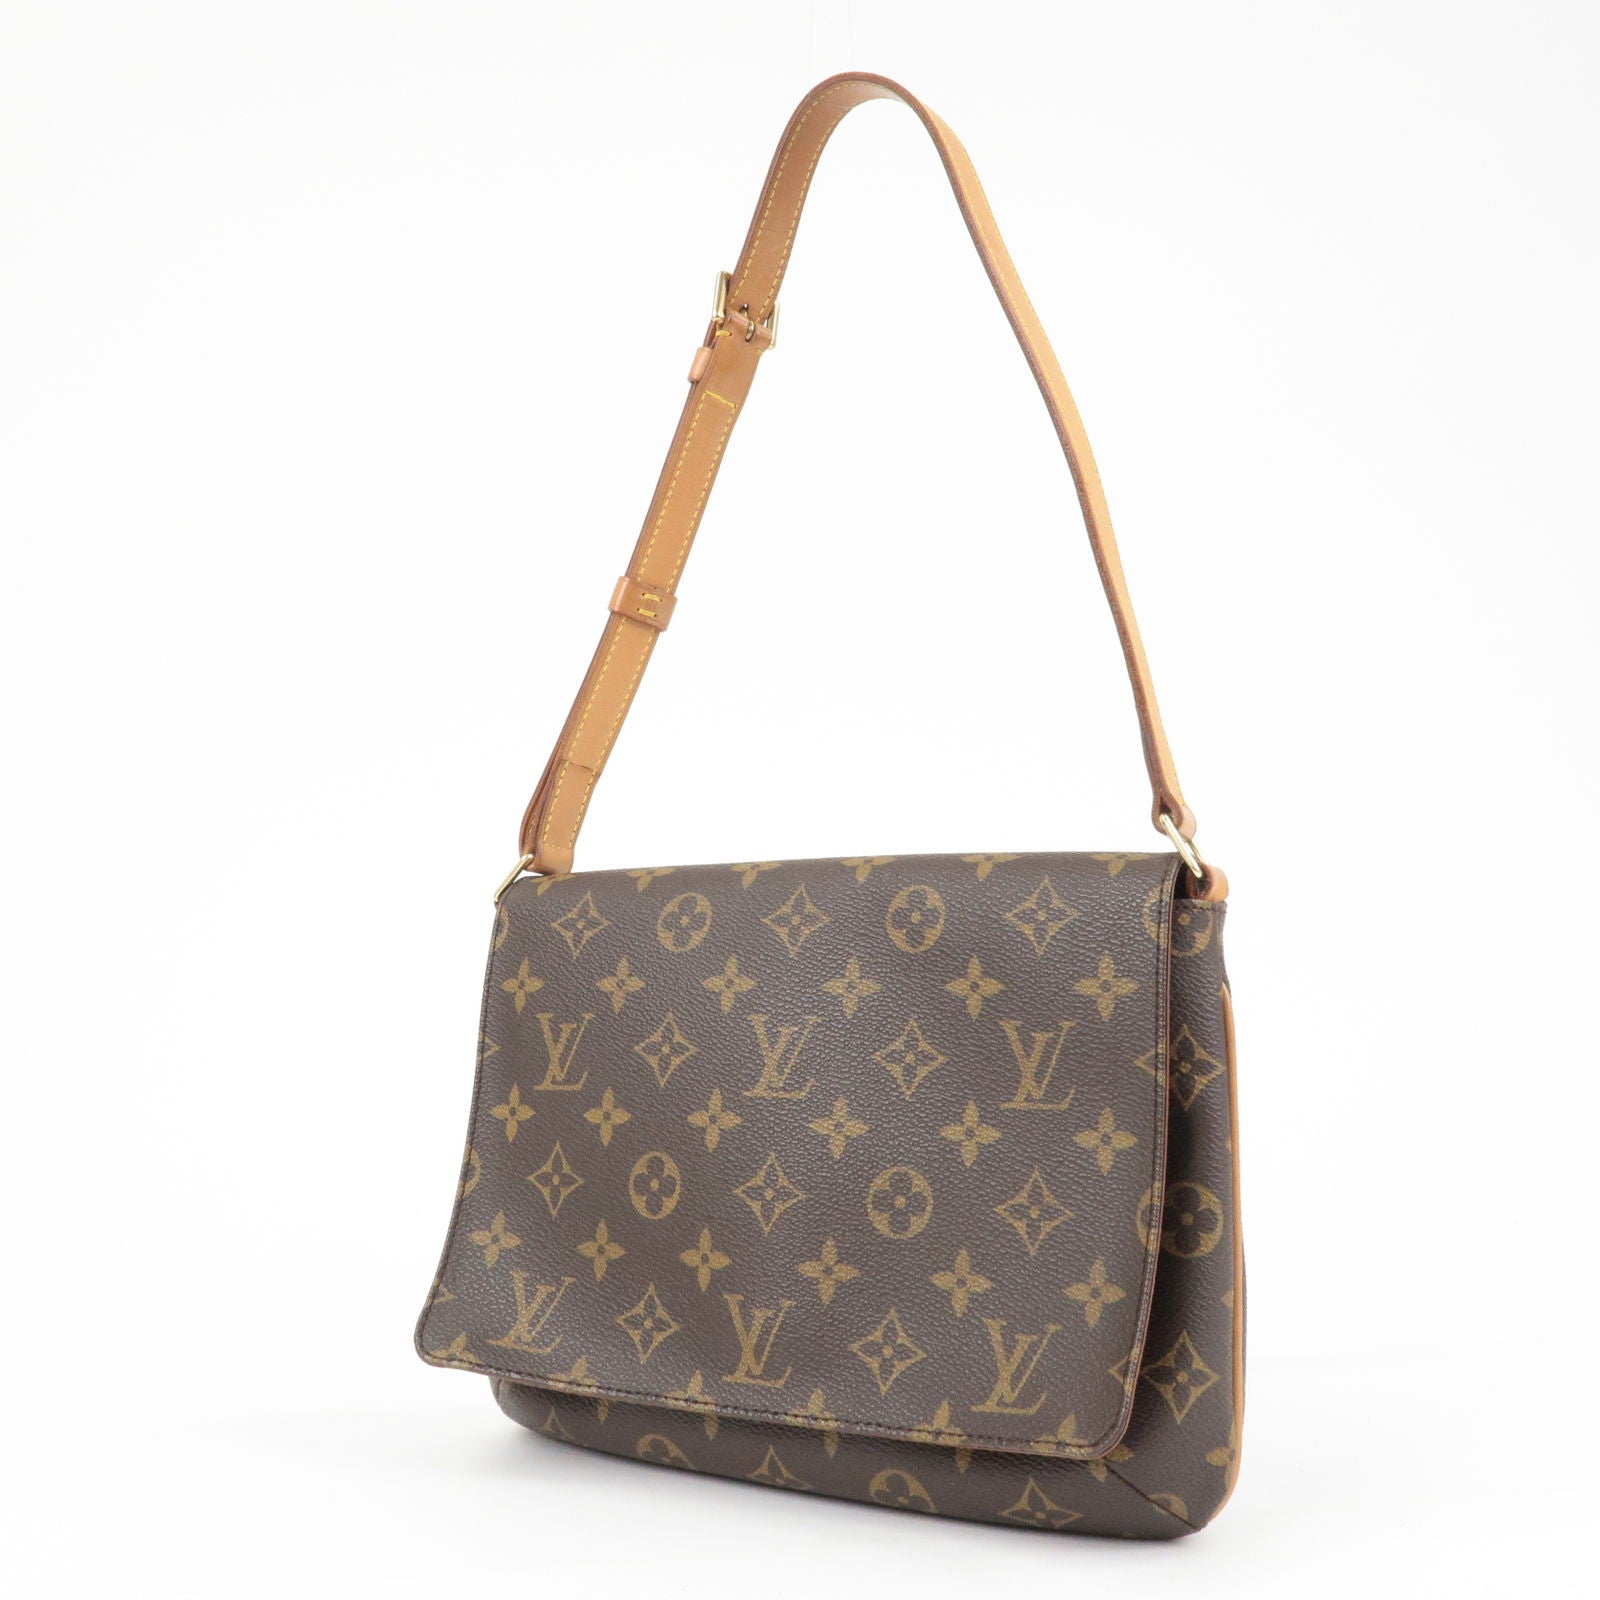 Louis Vuitton 2013 pre-owned Limited Edition Speedy Cube PM Bag